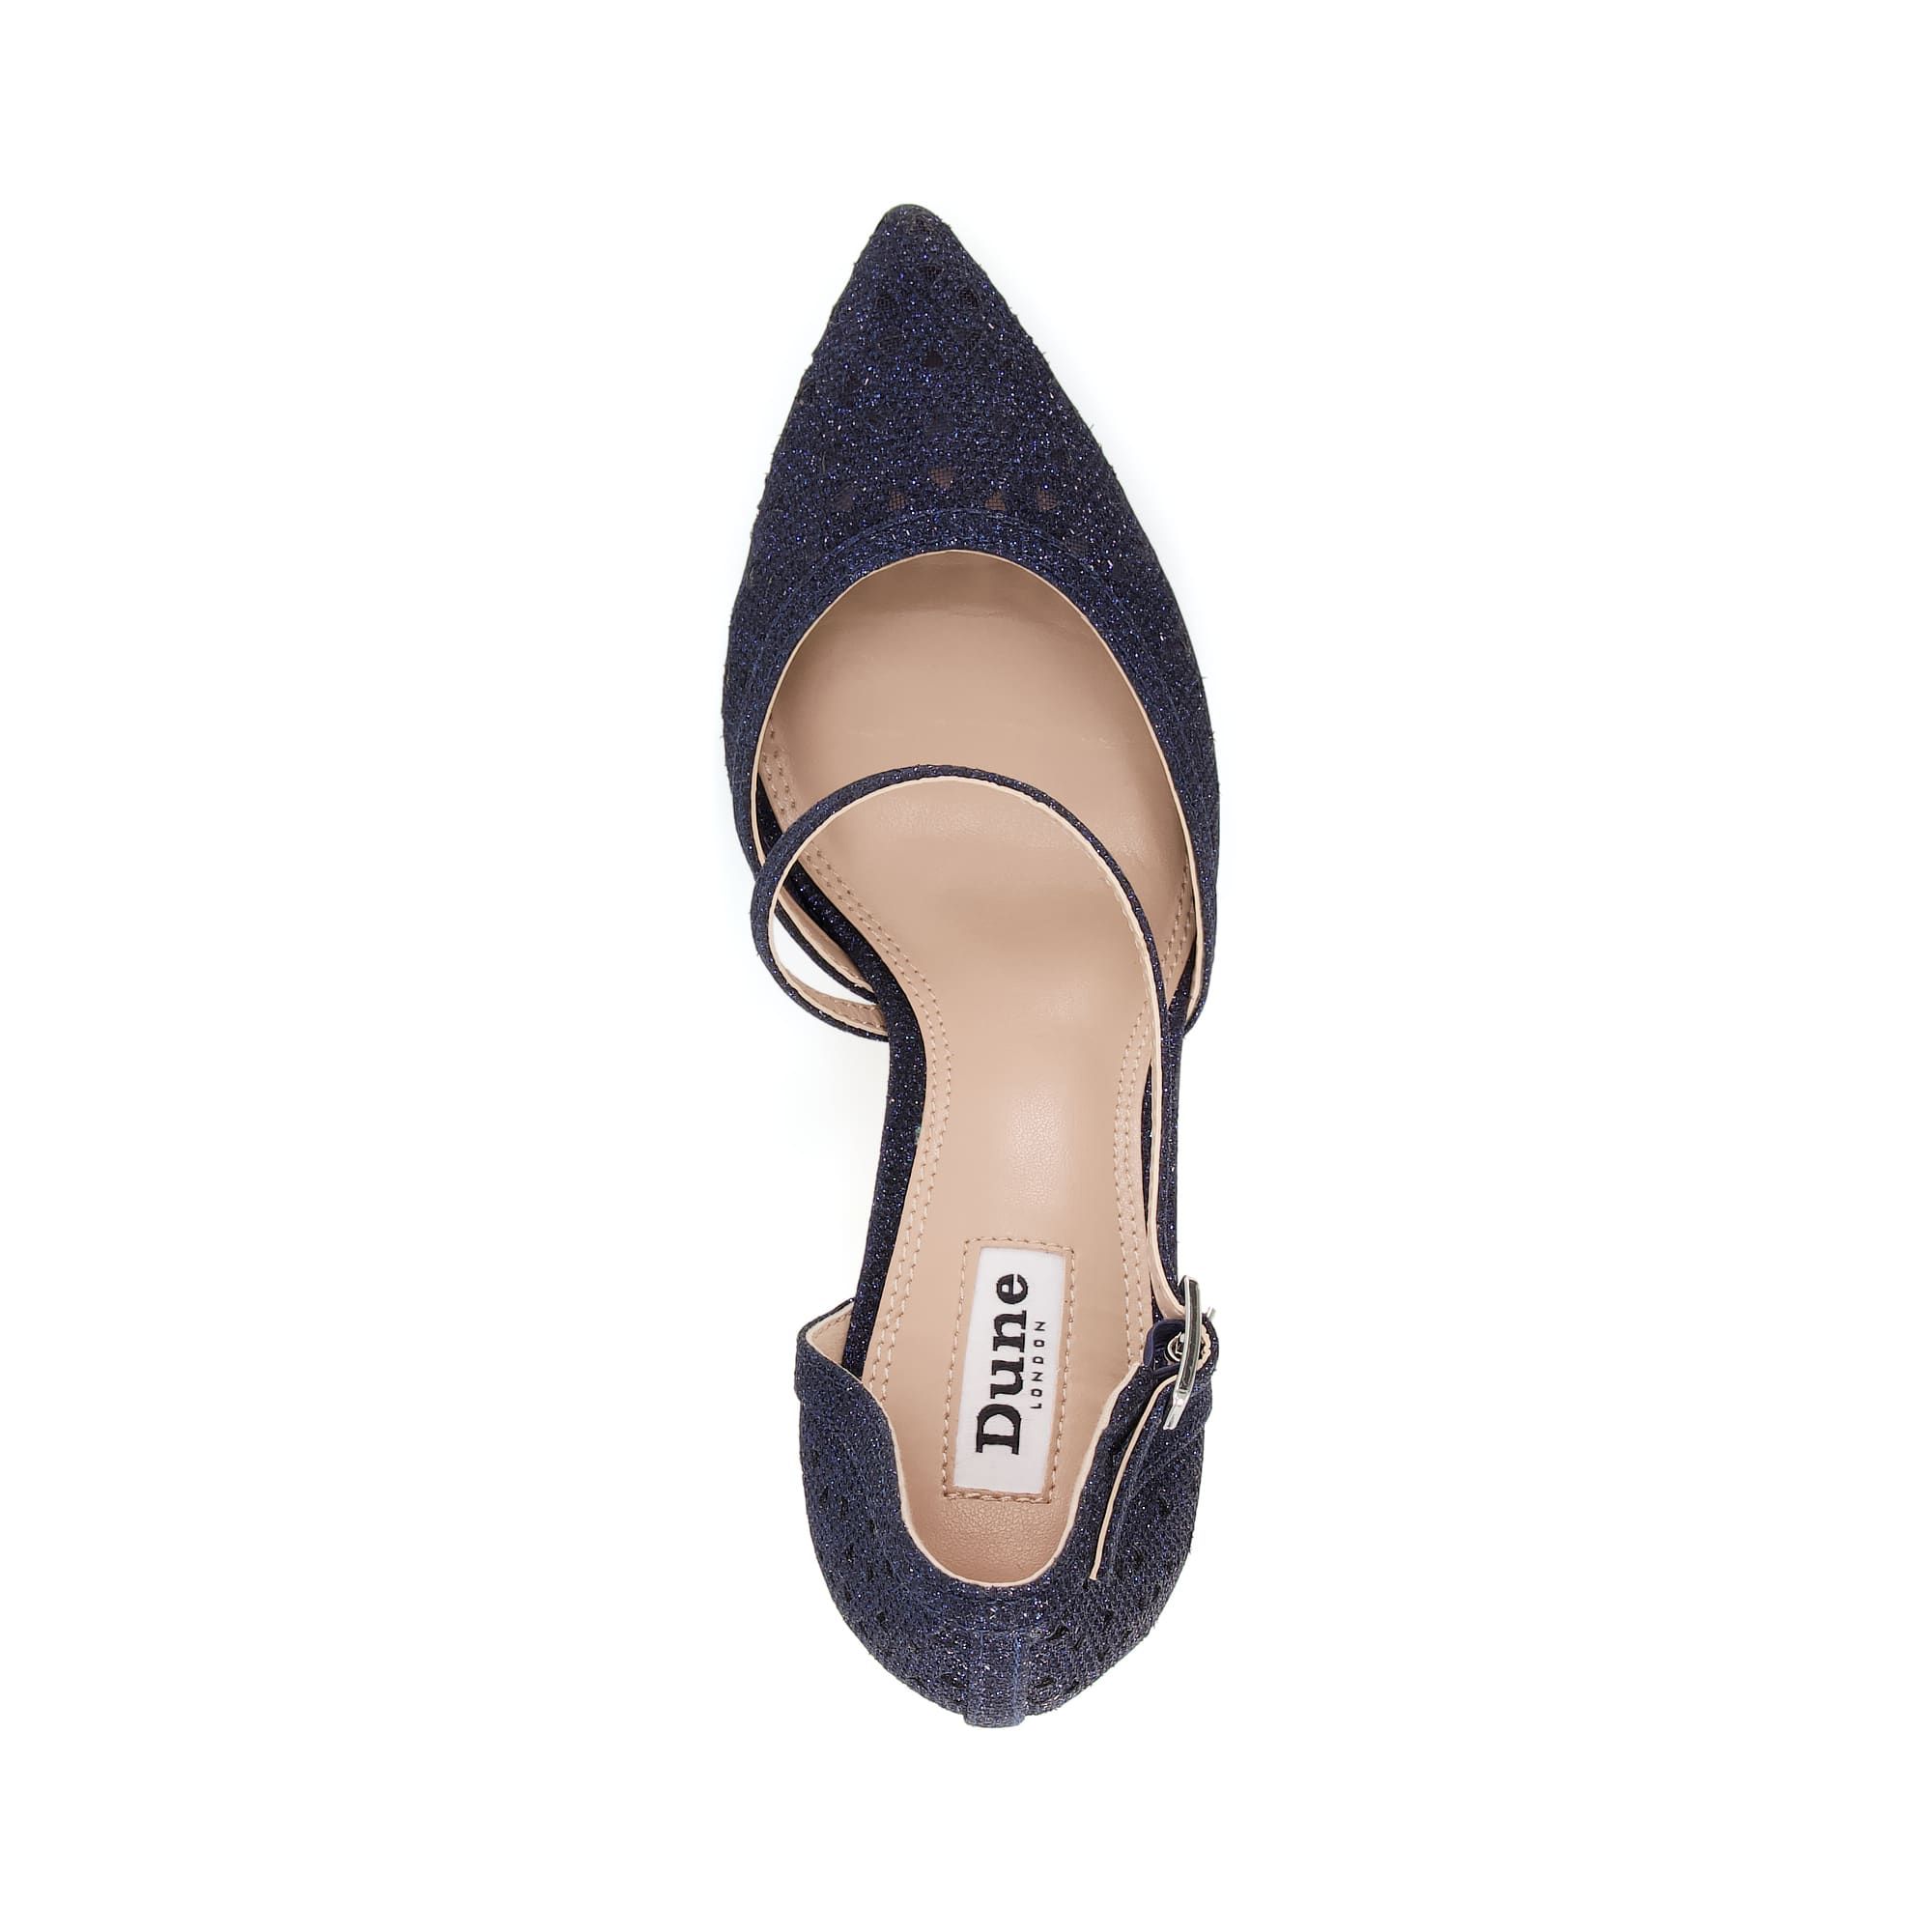 An ultra-chic style you can easily dress up or down. Crafted from a woven fabric, these pointed toe courts are set on a stiletto heel. Featuring an elegant asymmetric strap with an adjustable buckle.